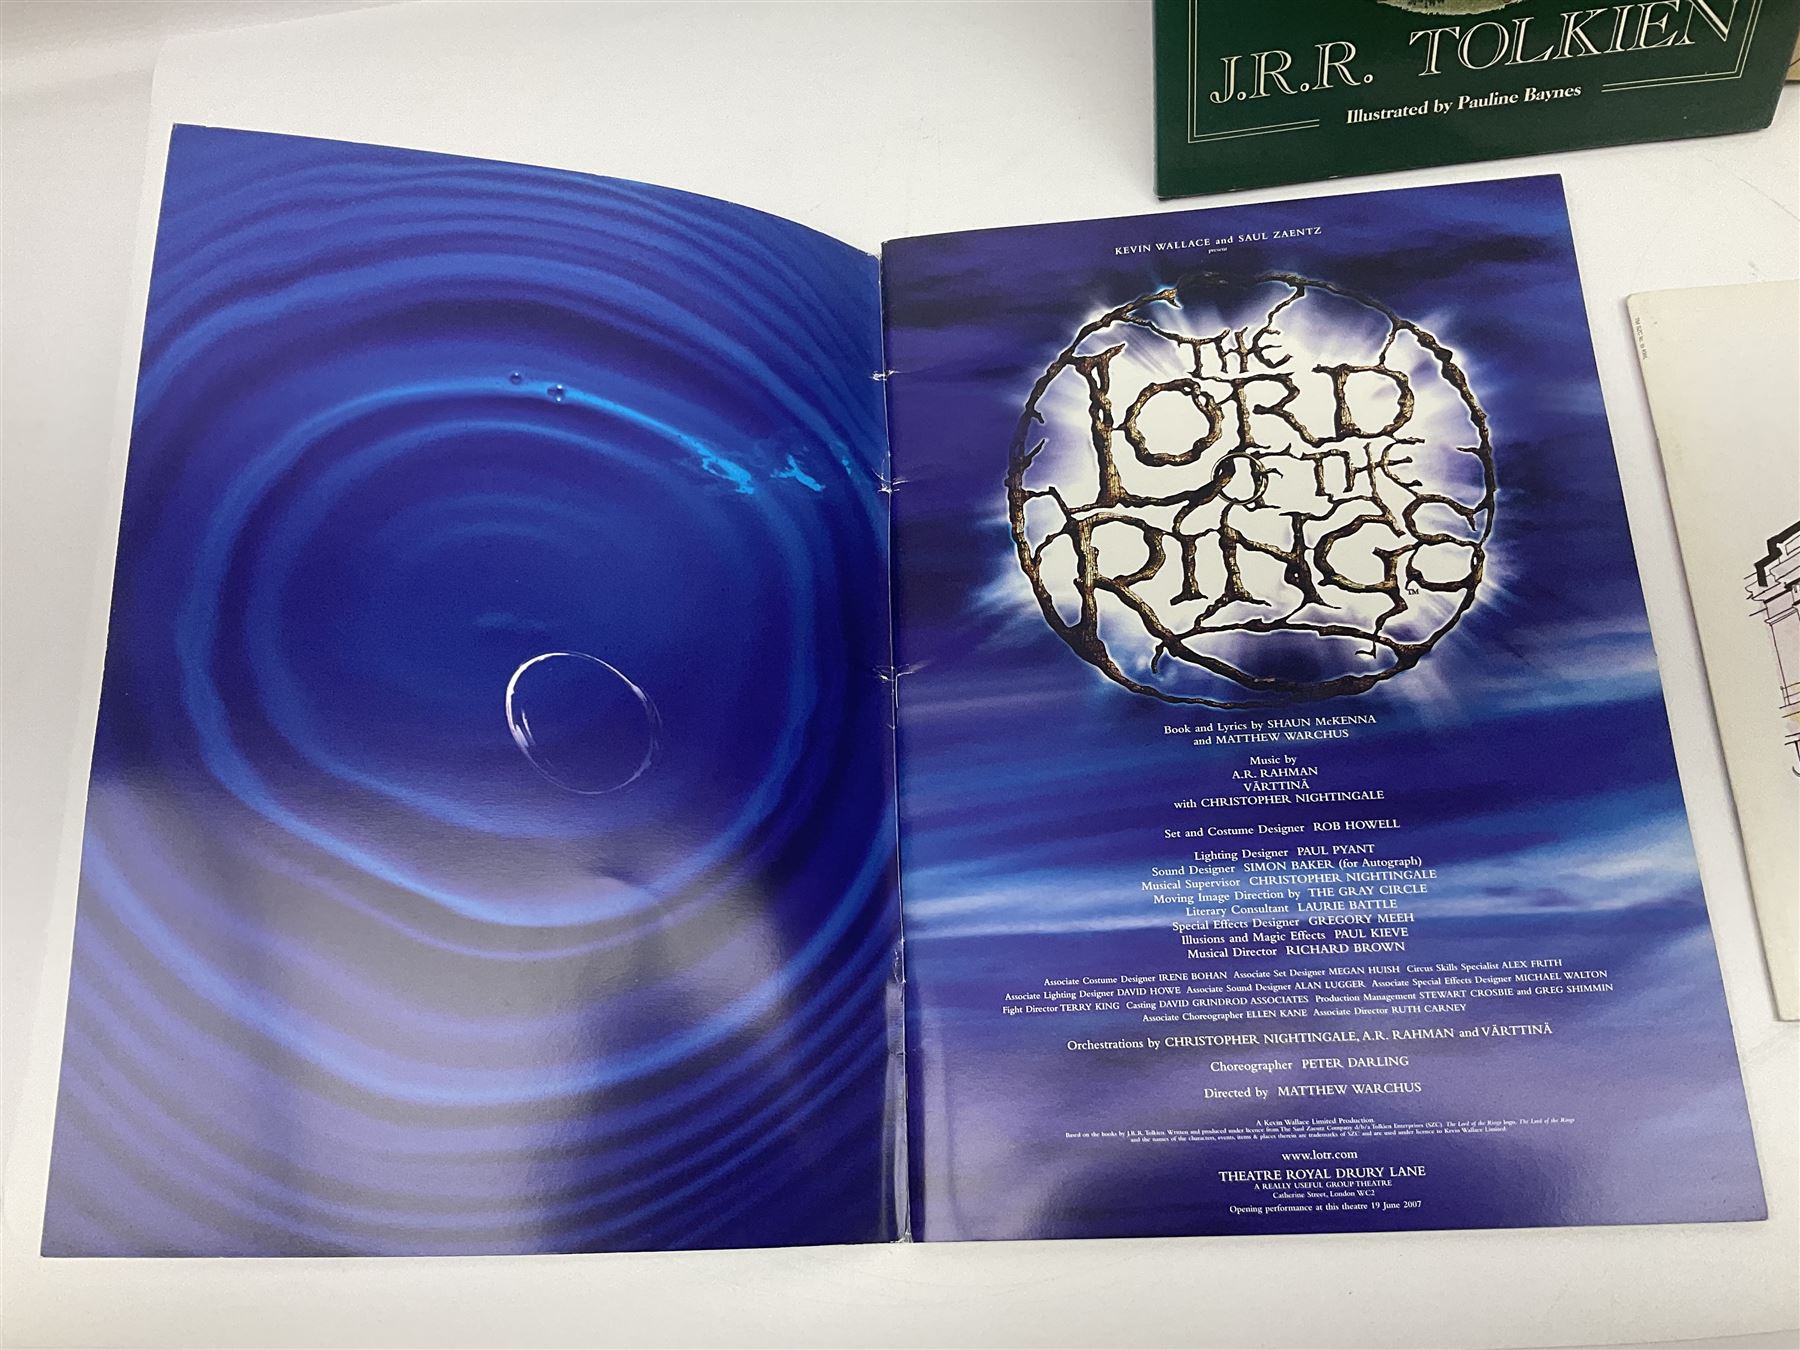 J.R.R. Tolkien 'The Lord of the Rings' Deluxe Edition seventh impression and 'Poems and Stories' pub - Image 18 of 23